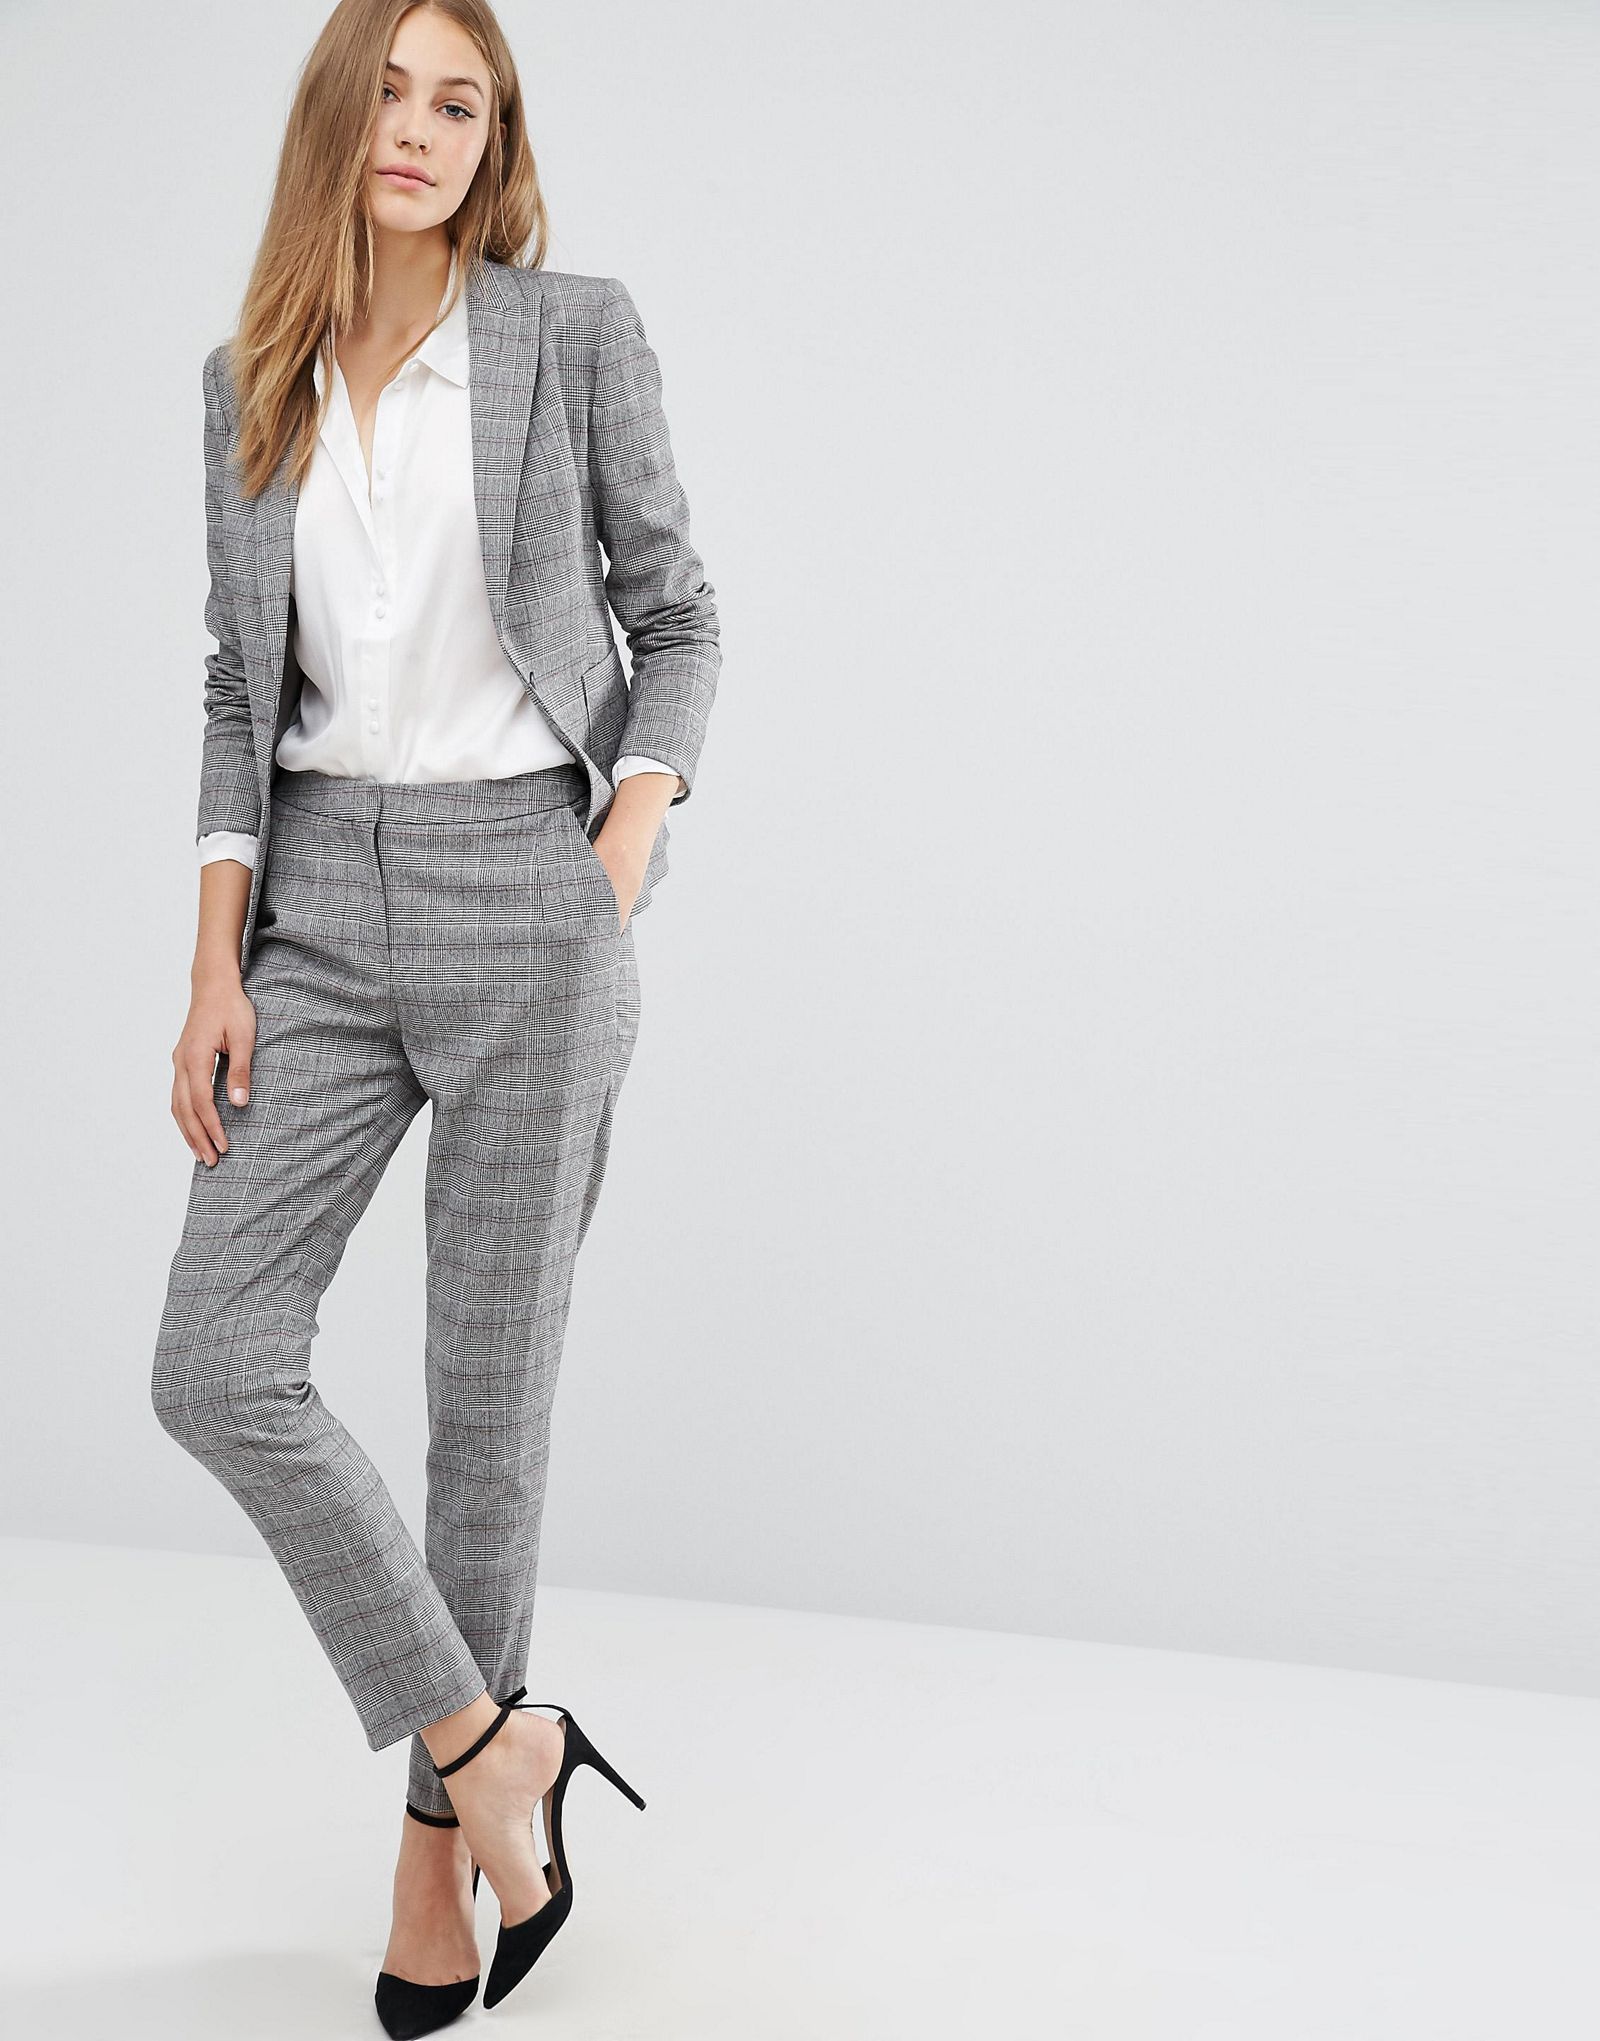 Reiss Check Jacket